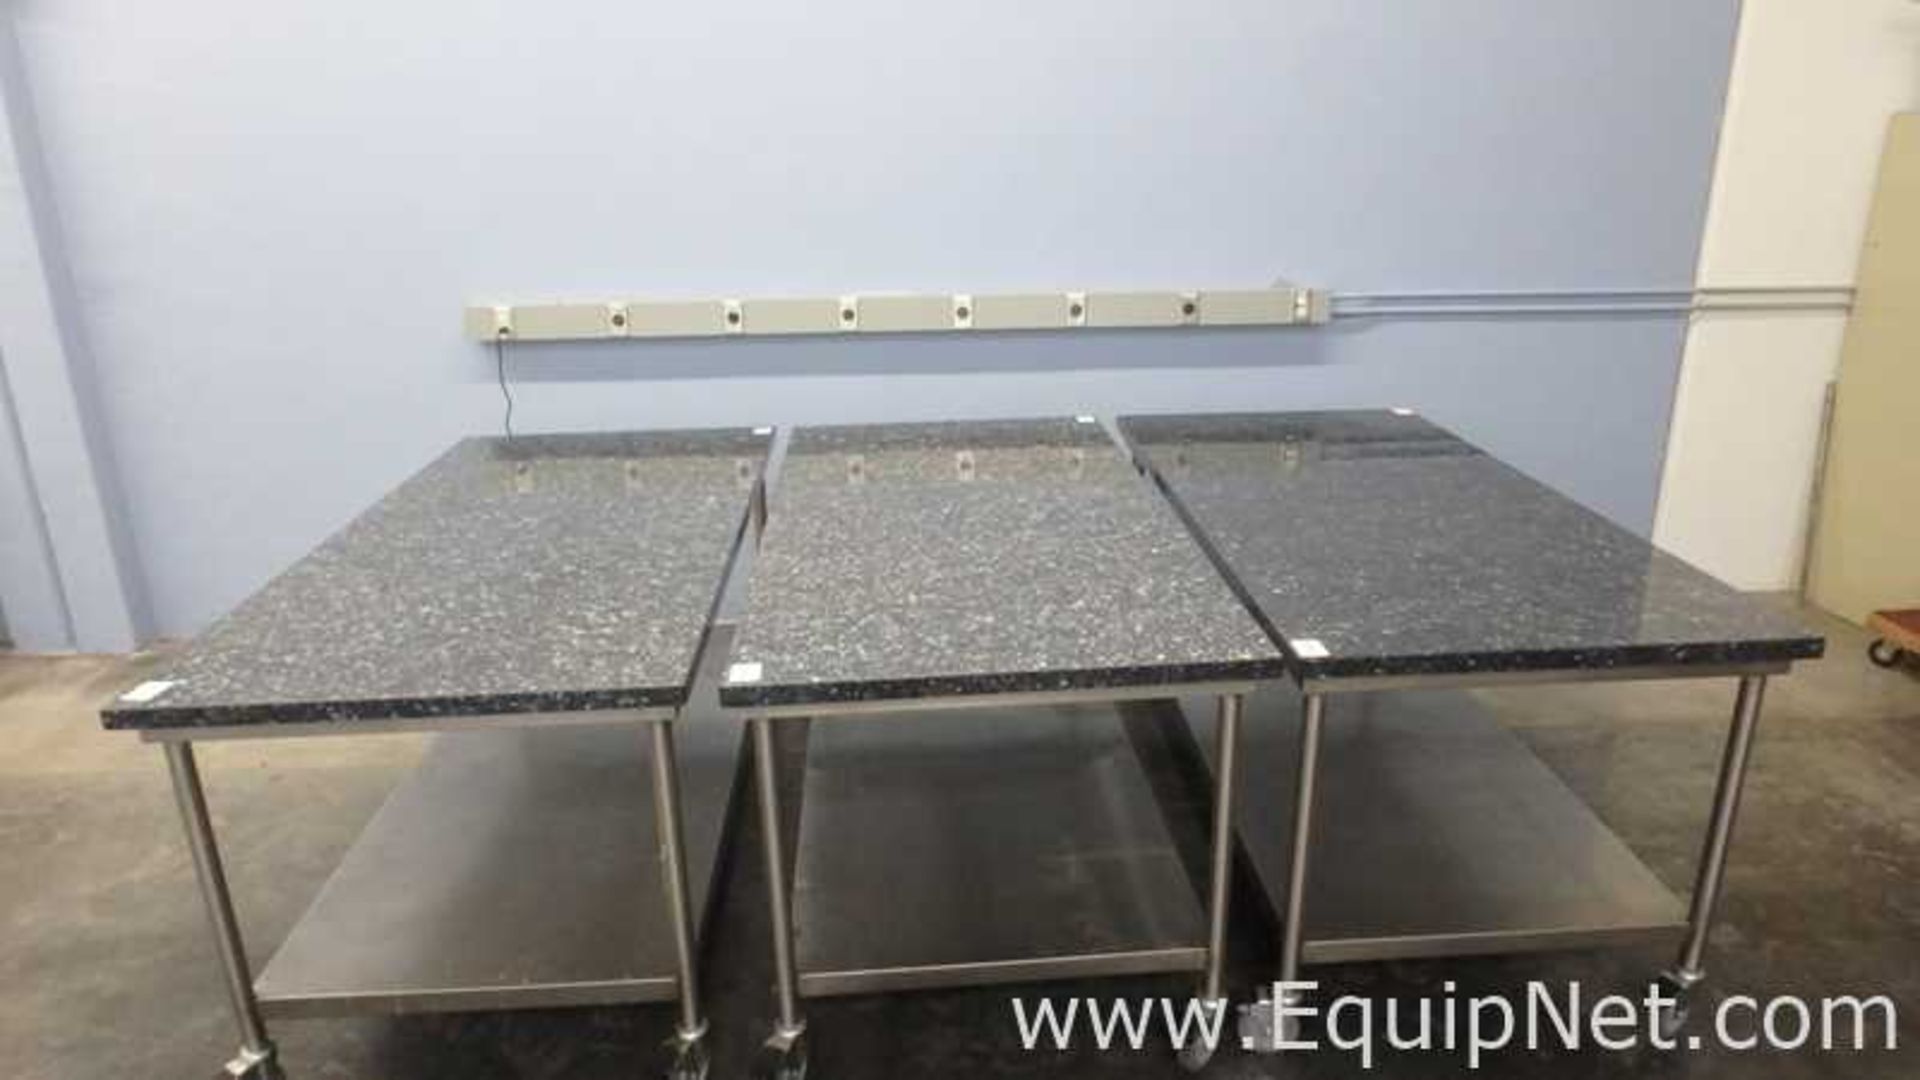 Lot of 3 Granite Top Stainless Steel Work Tables 75in x 39in - Image 9 of 9